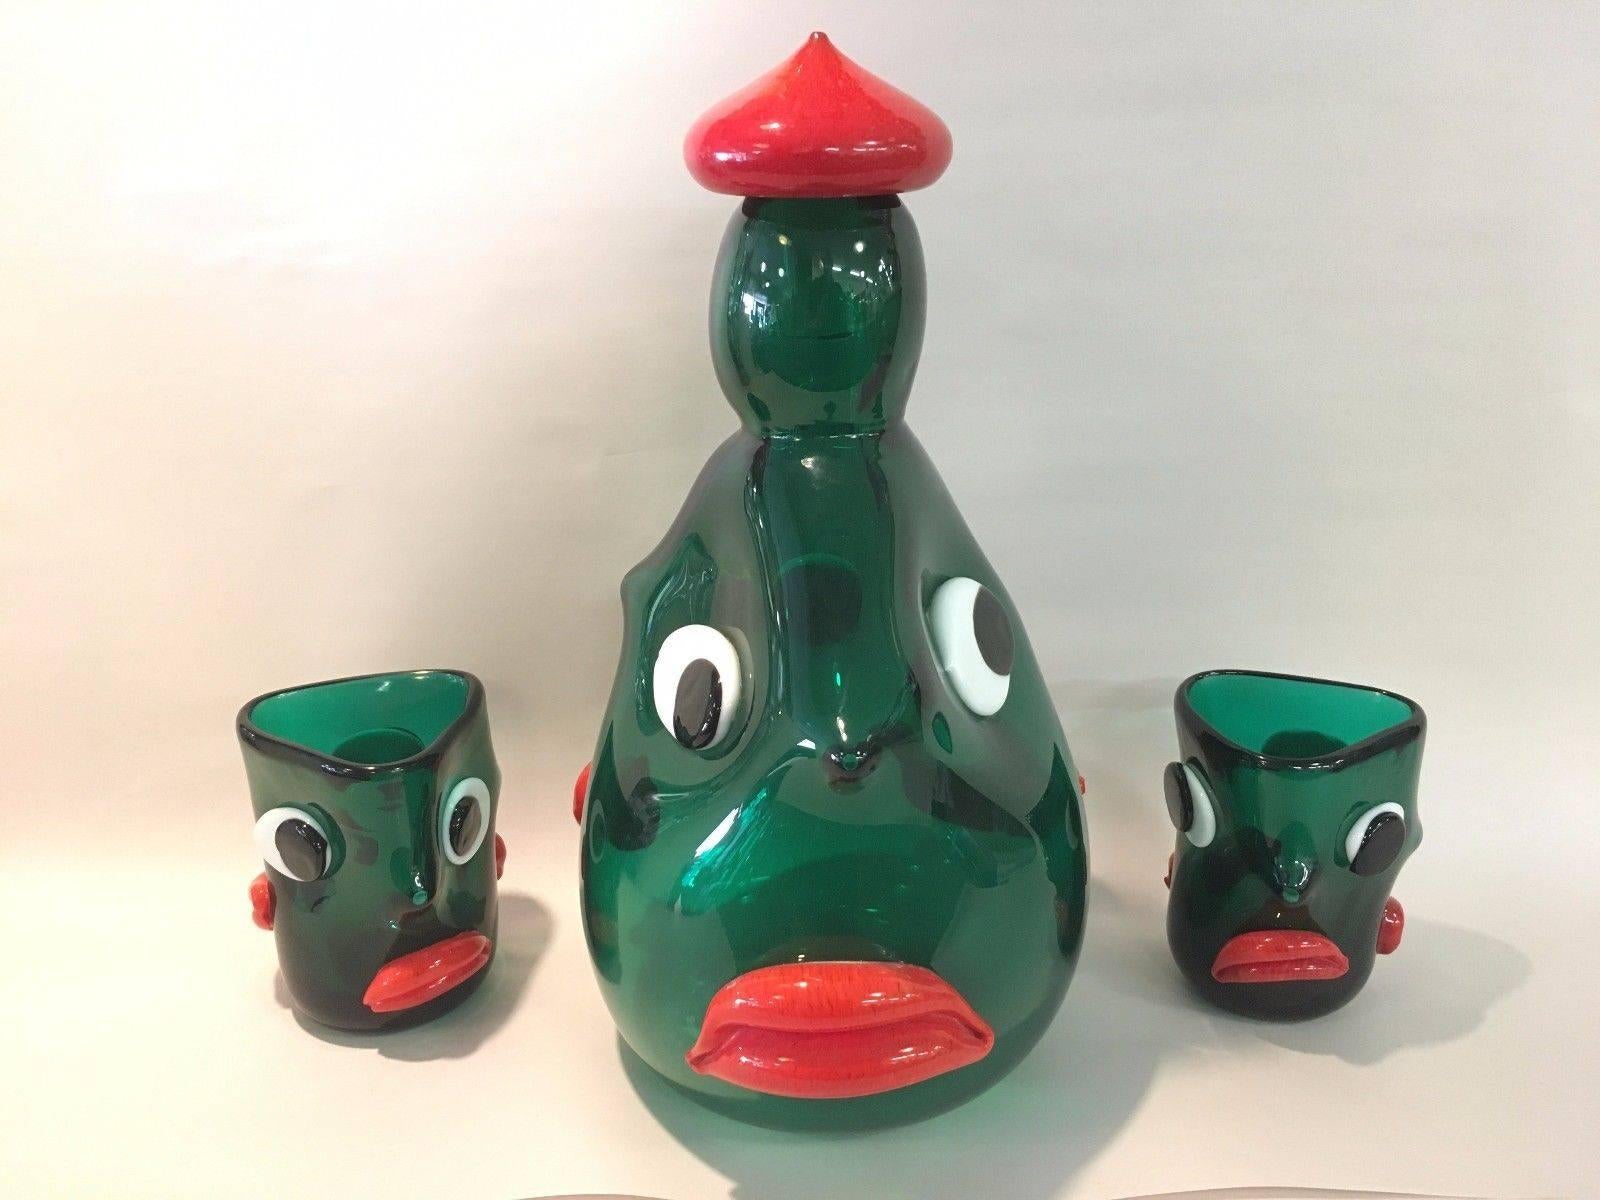 Extremely rare drink set designed by Anzolo Fuga for AVEM. The glasses are documented in many books, I have never seen the matching decanter. Each piece has three faces. Measure: Decanter is 12 1/4 inches tall by 8 inches wide by 7 inches deep. The